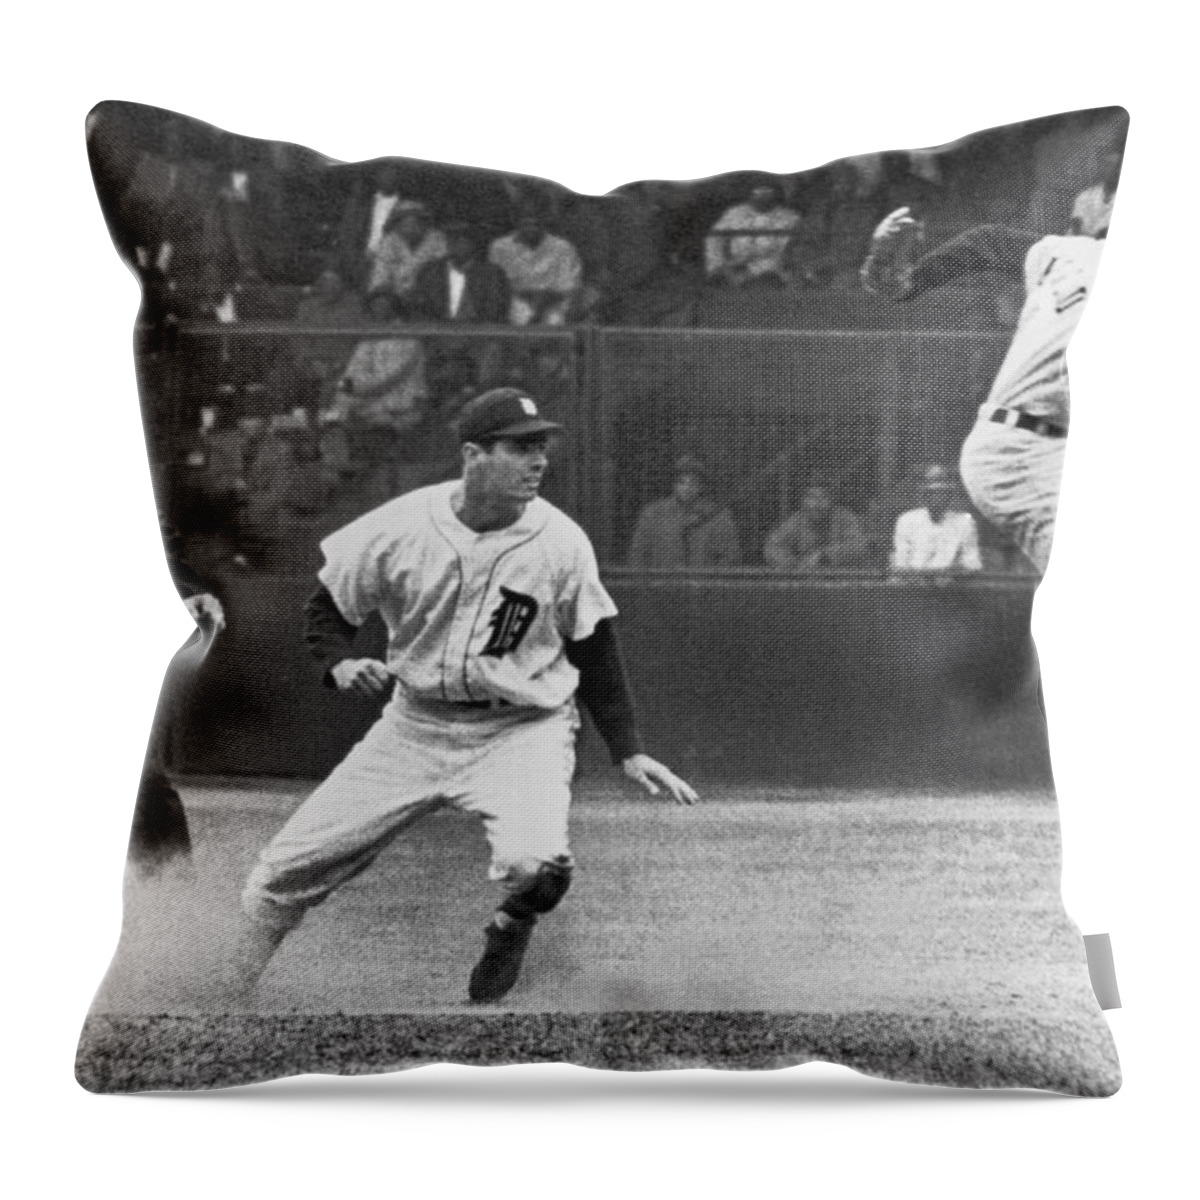 1950s Throw Pillow featuring the photograph Colavito And Aparicio by Underwood Archives